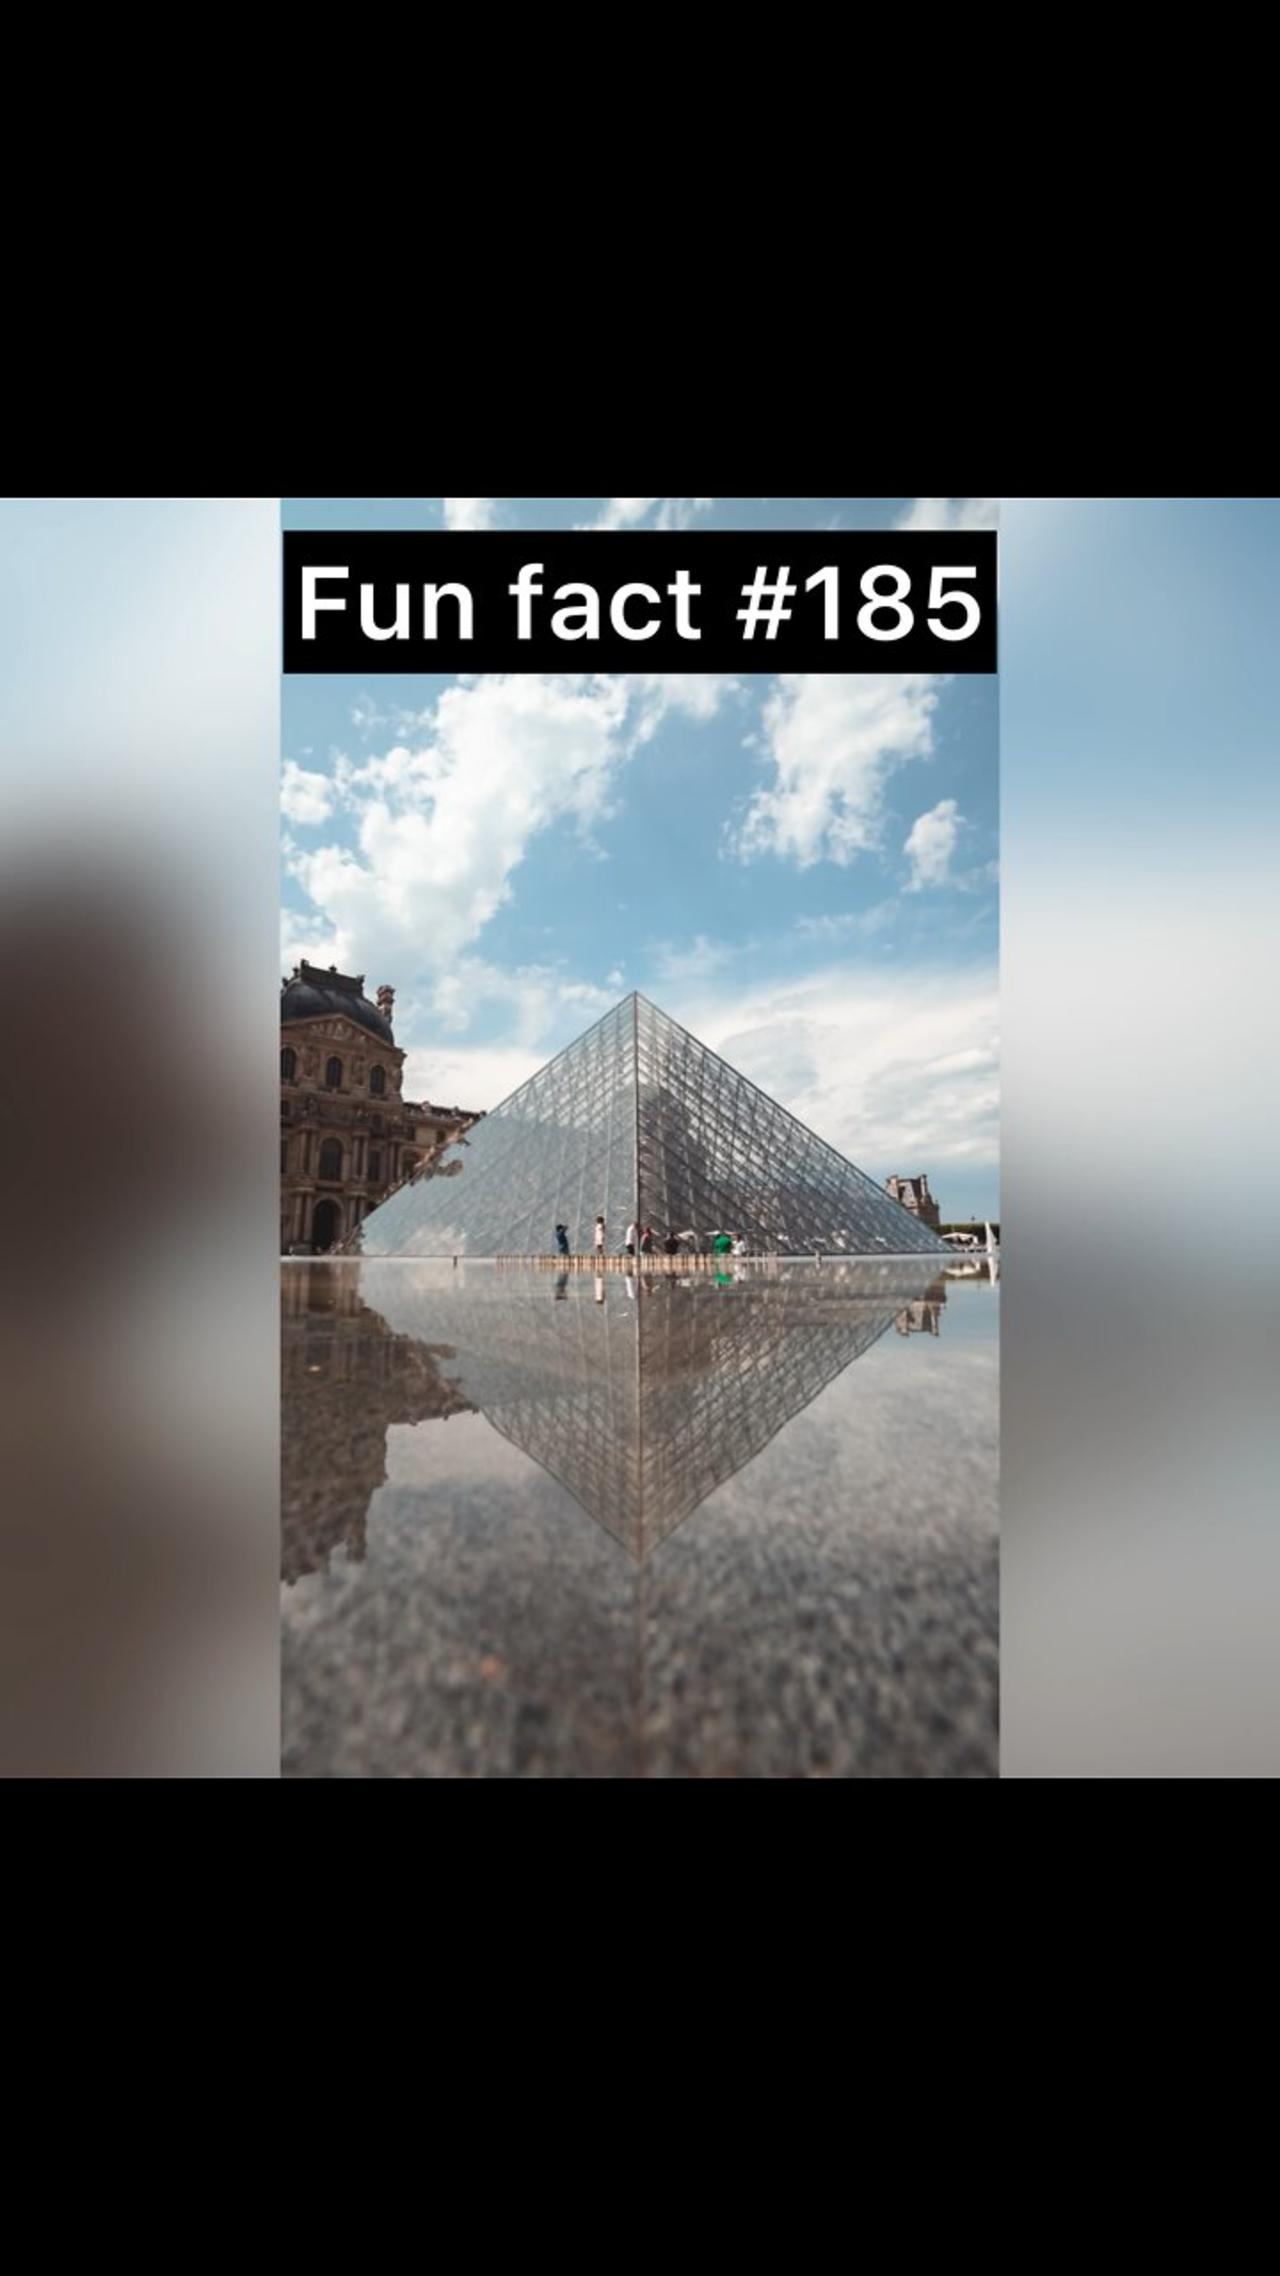 Did you know this about Louvre museum?